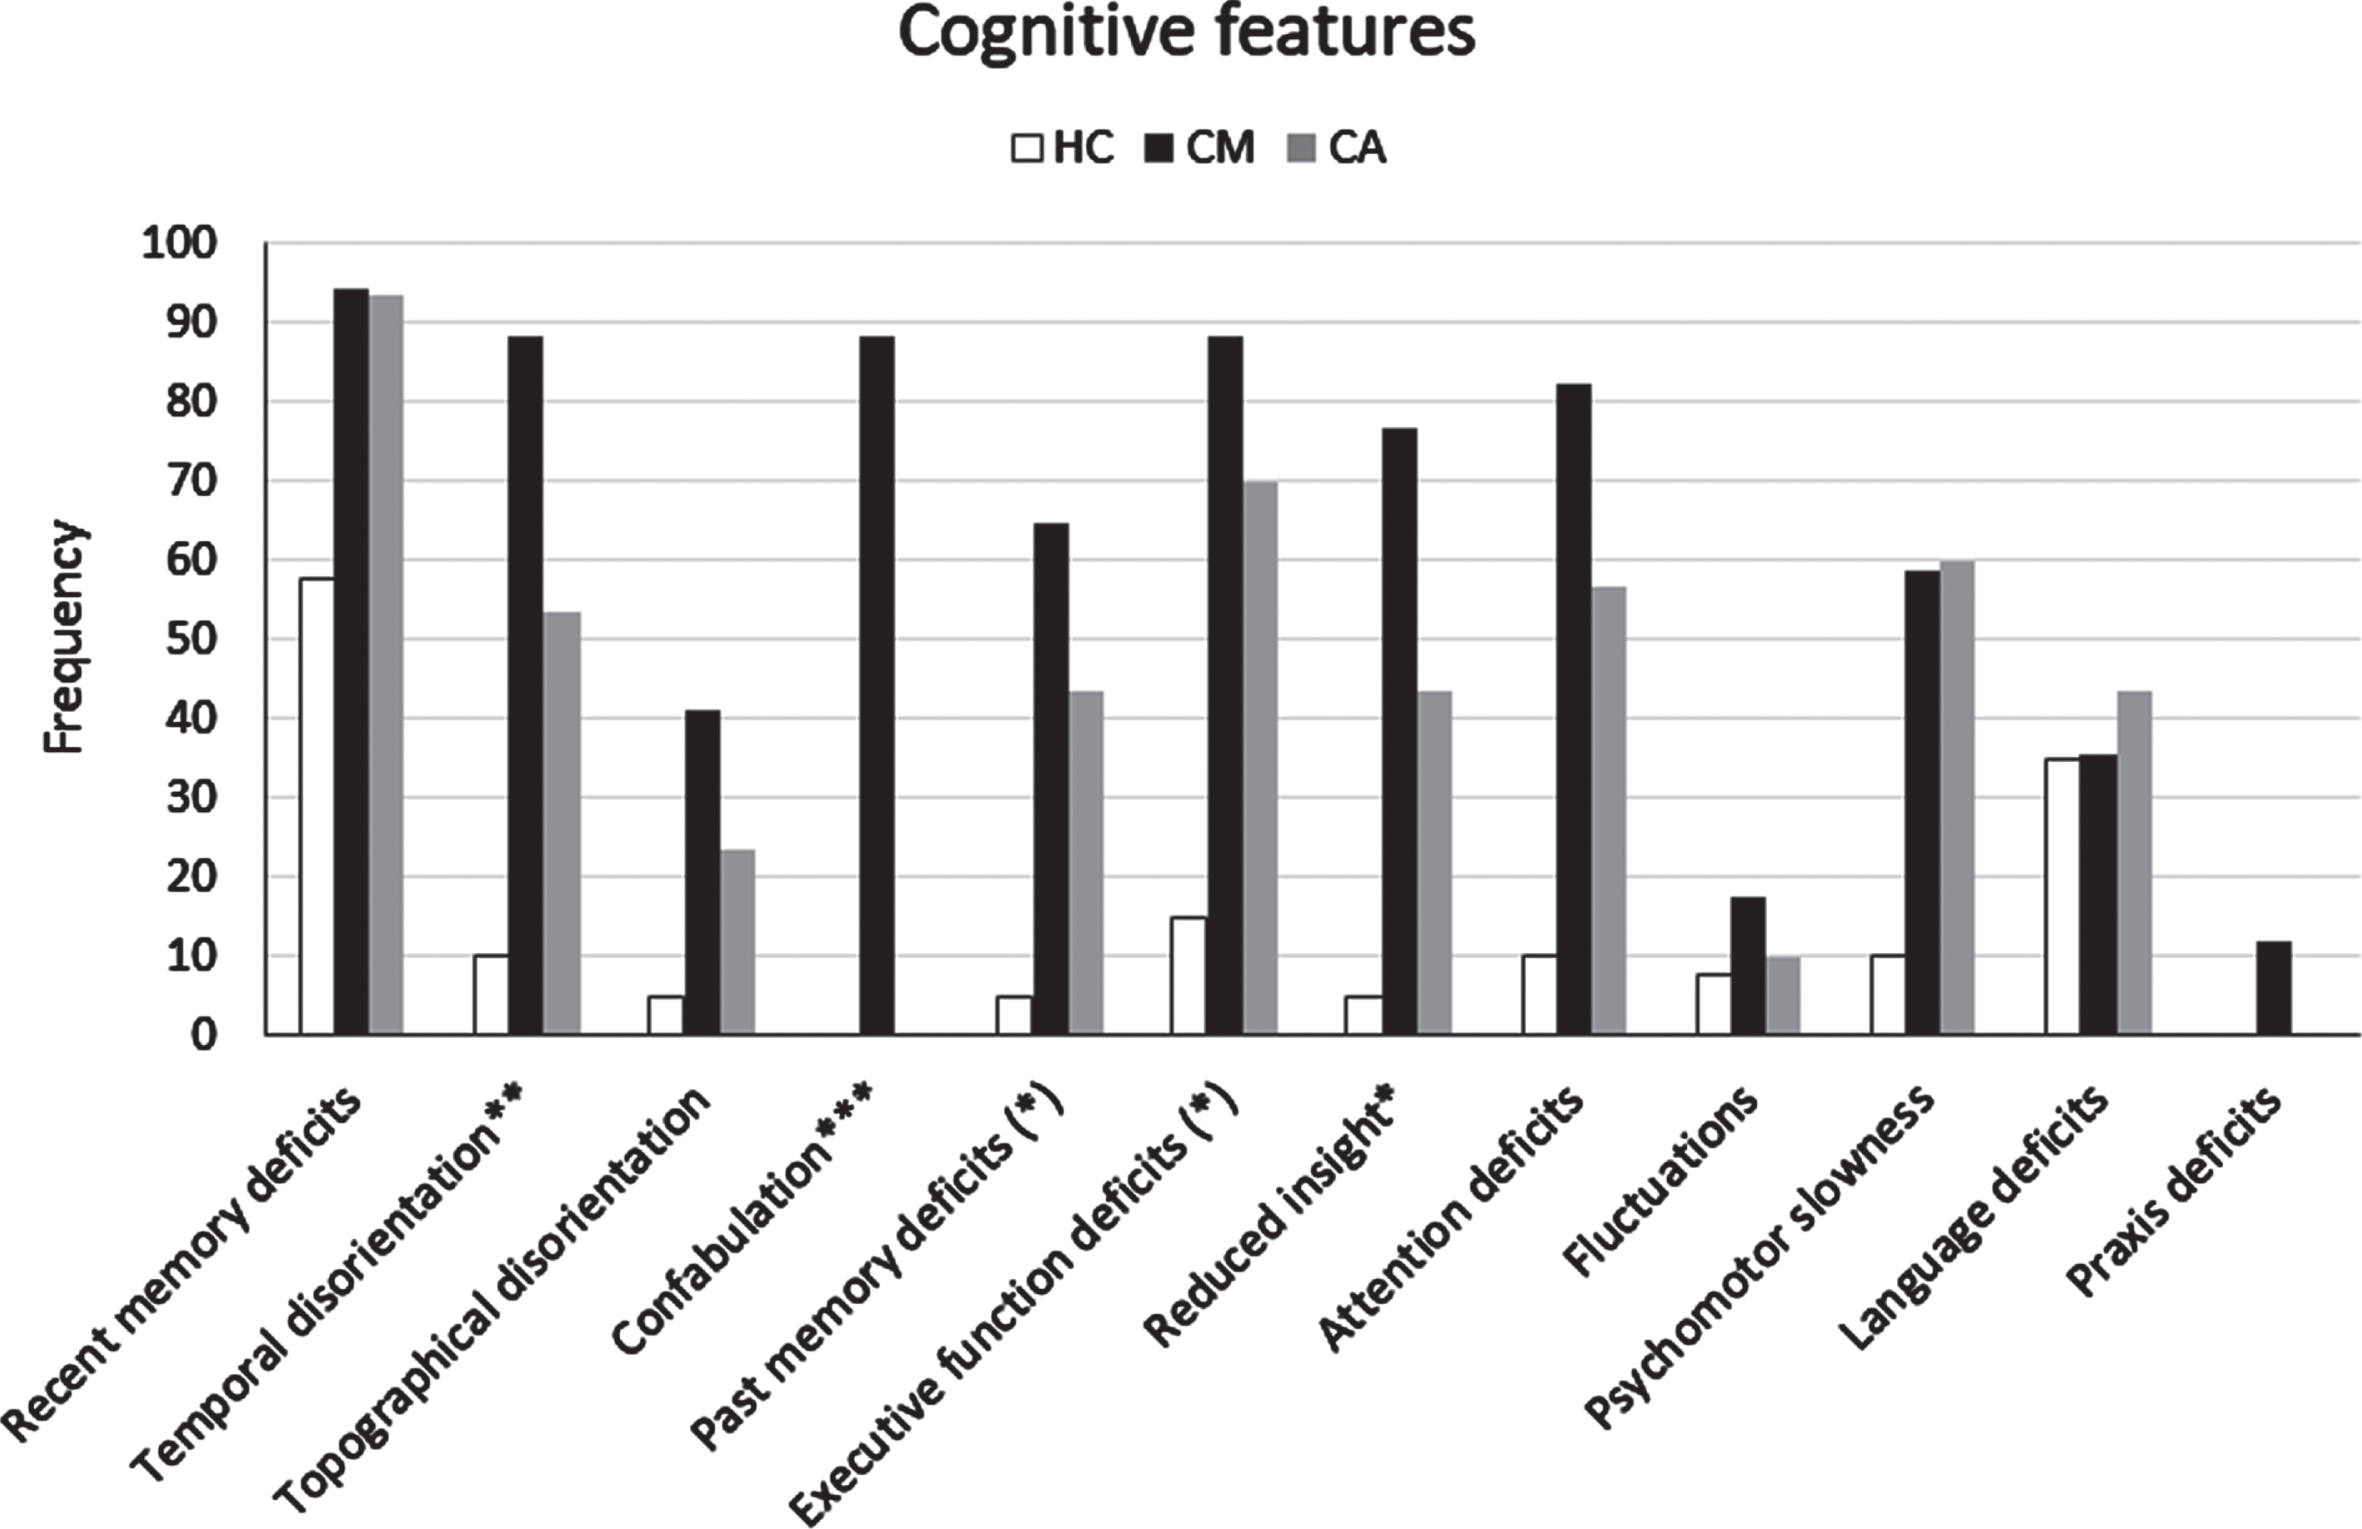 Frequency of cognitive features detected by clinical assessment (informant report and/or NPE) in the CM-AD group of patients compared to those in the CA-AD and HC group. *indicates a statistically significant difference CM > CA at p < 0.05. **indicates a statistically significant difference CM > CA at p < 0.01. ***indicates a statistically significant difference CM > CA at p < 0.001. (*) indicates a difference CM > CA with tendency to significance.